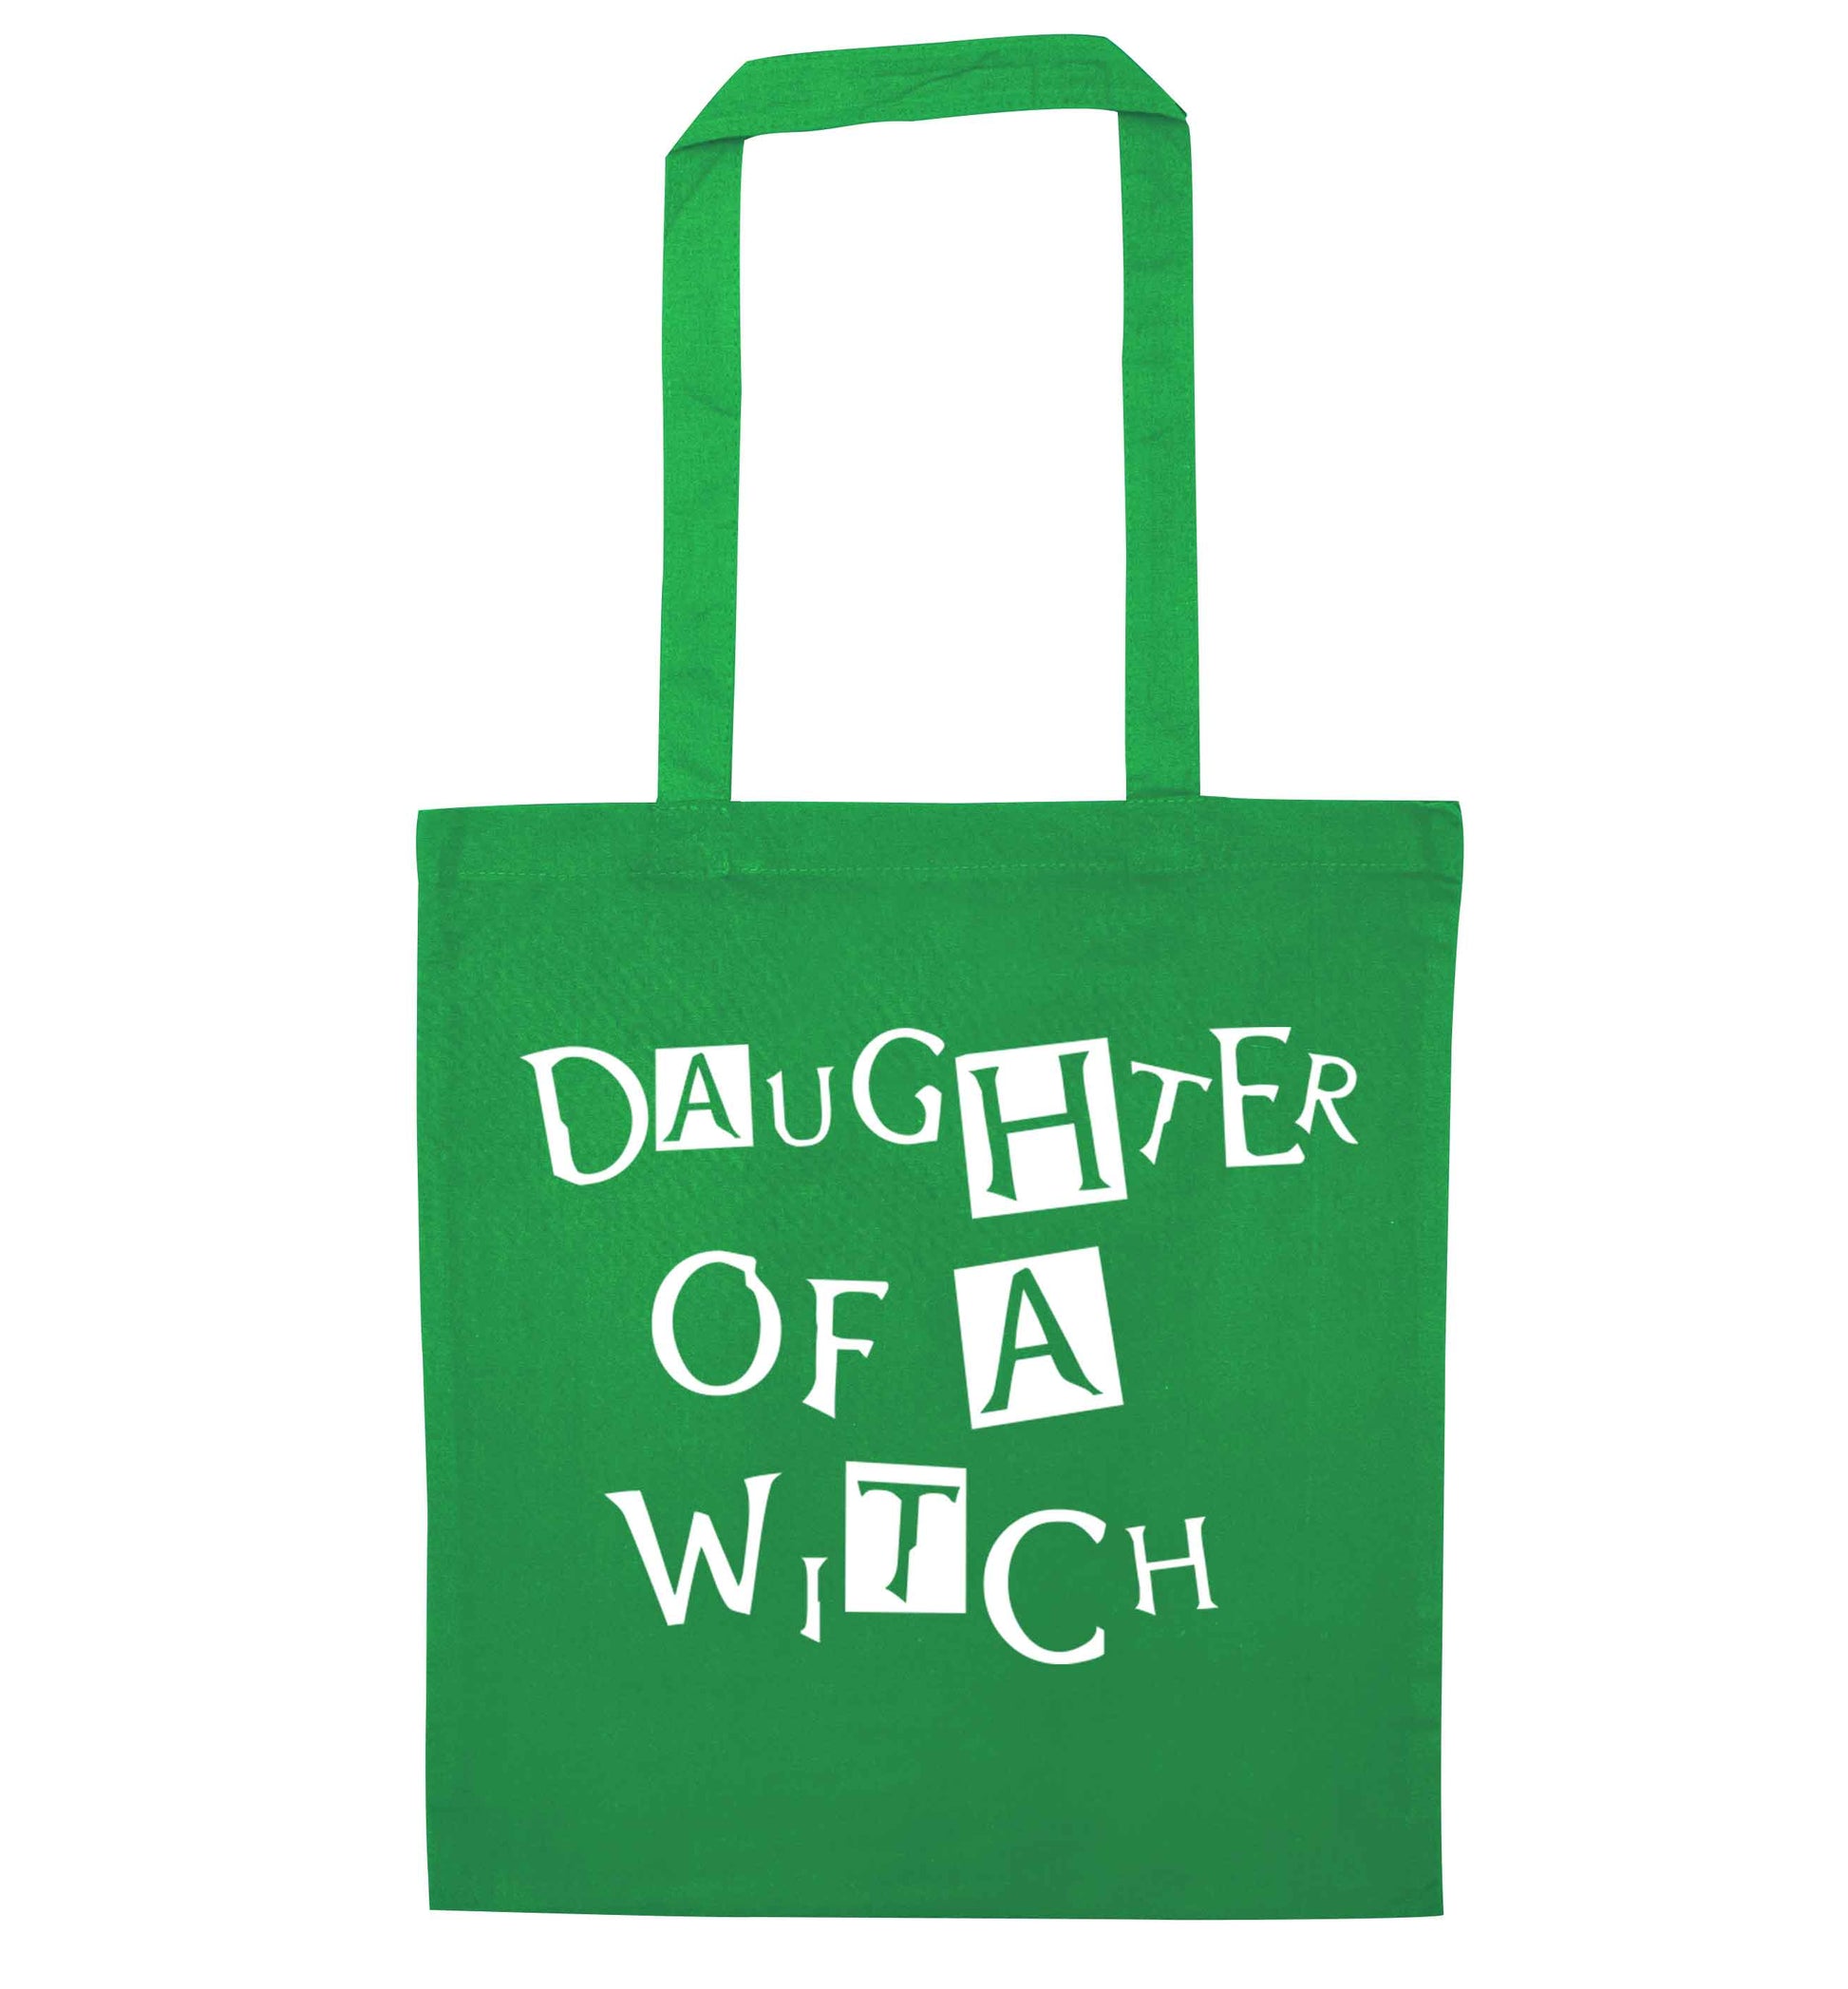 Daughter of a witch green tote bag